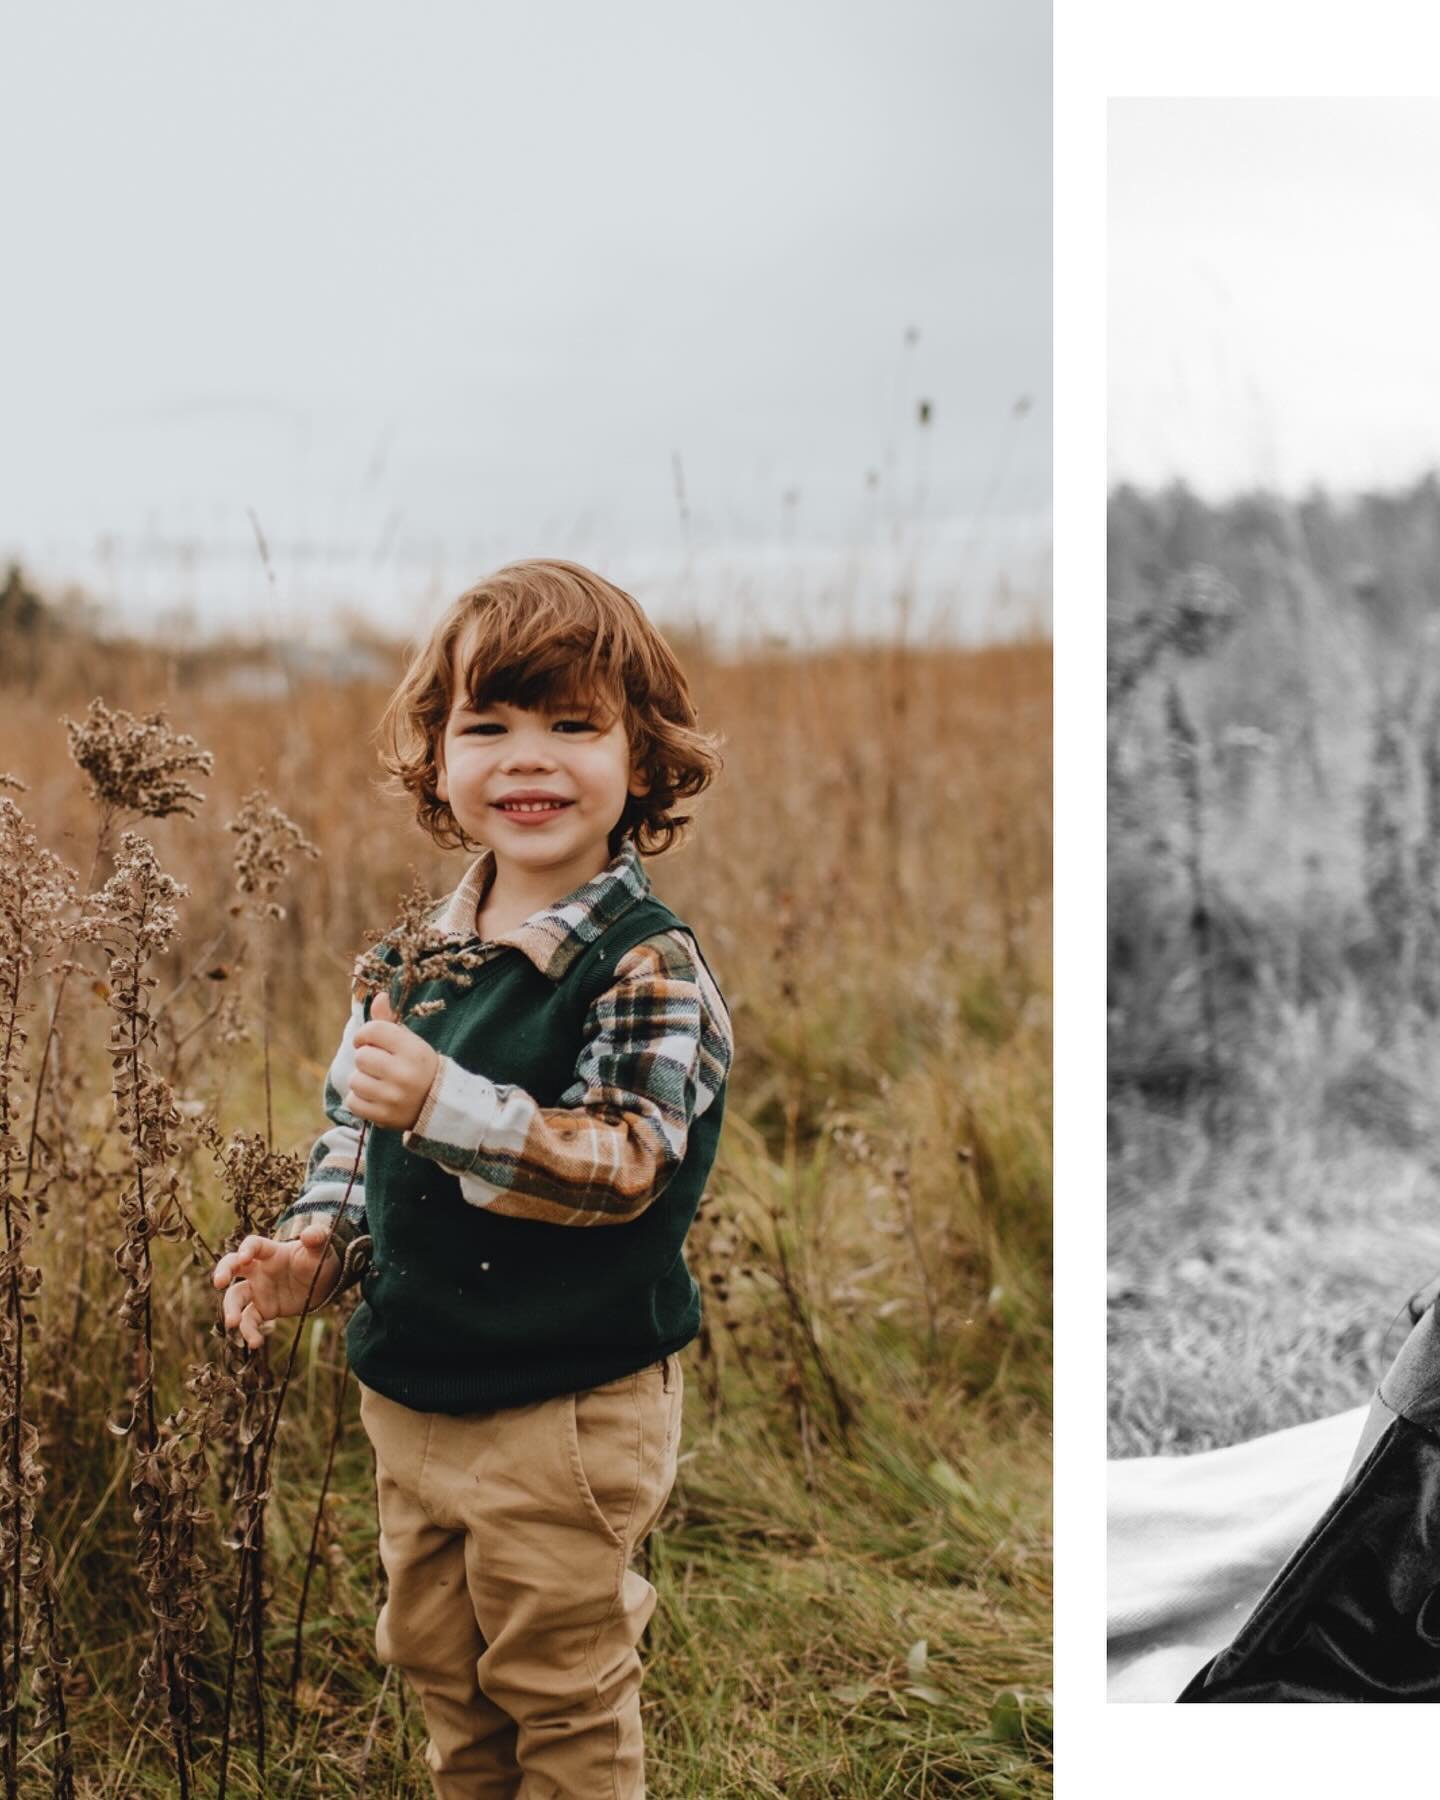 Looking back at some fall sessions I haven't had a chance to share yet, here's one of many from Mequon Nature Preserve.

#milwaukeefamilyphotographer #mequonfamilyphotographer #mkephotographer #milwaukeefamily #milwaukeelifestylephotographer #mequonn